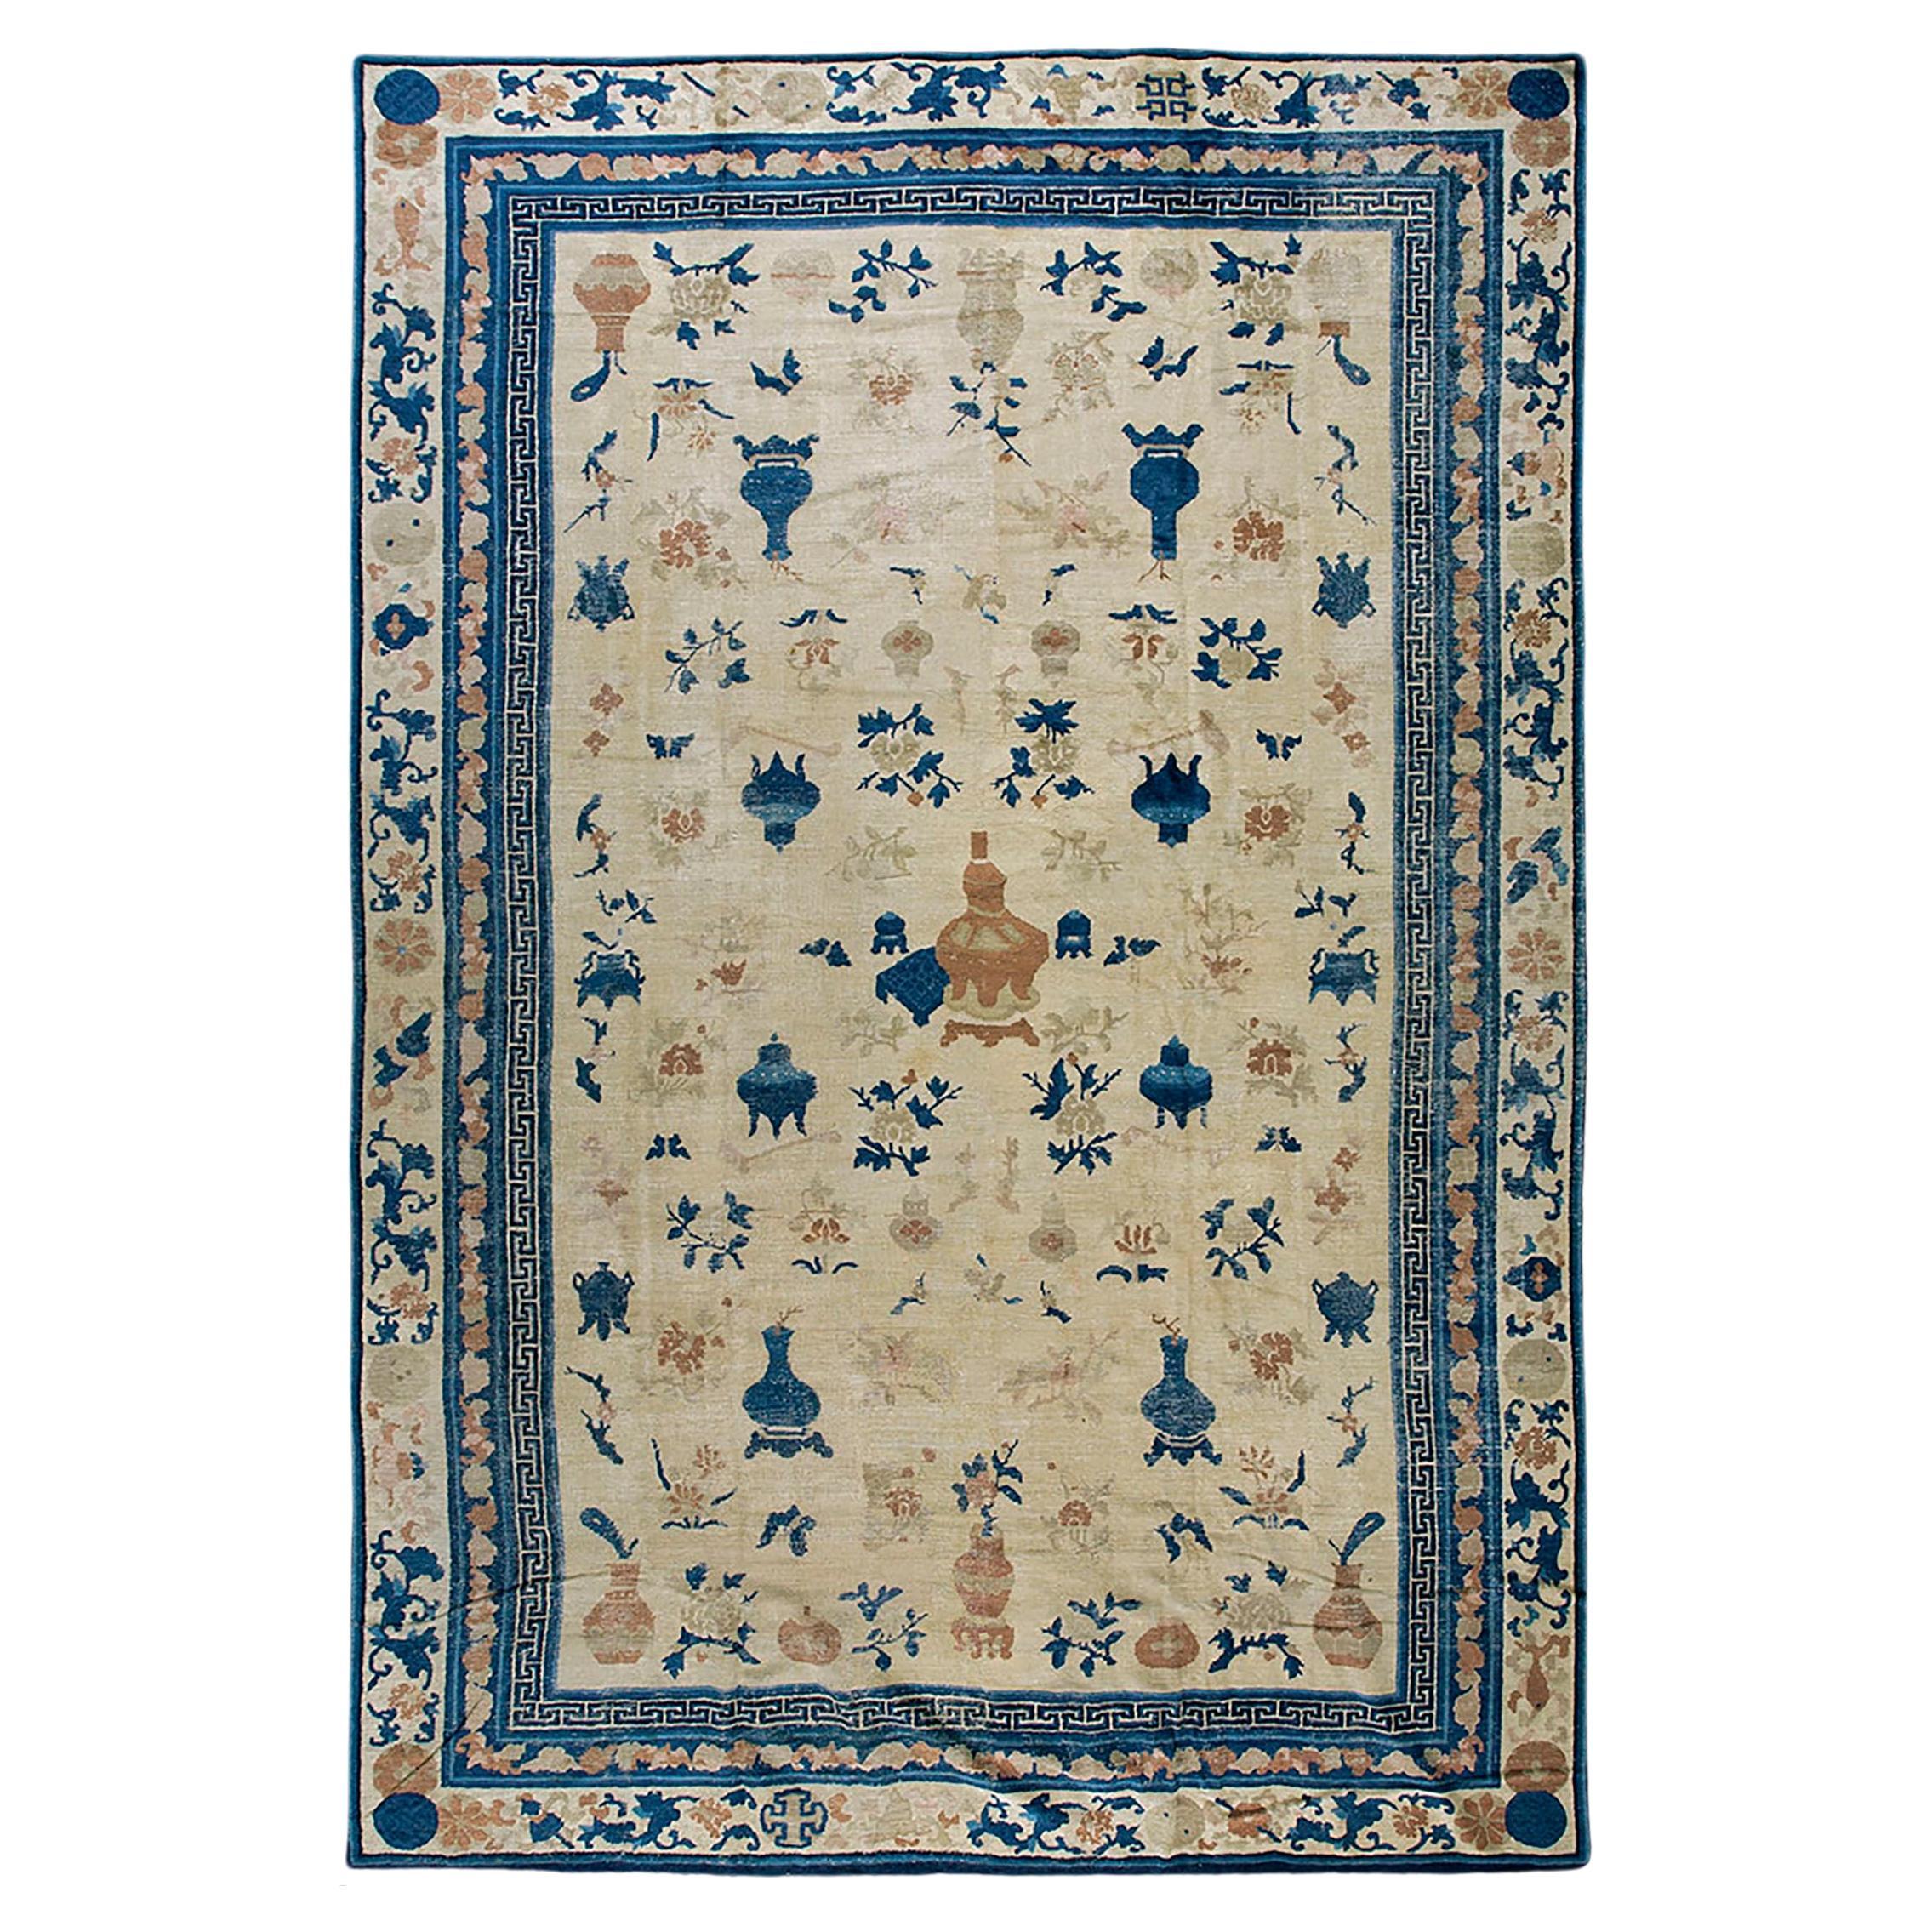 19th Century W. Chinese Ningxia Carpet ( 10'6" x 15' - 320 x 457 ) For Sale